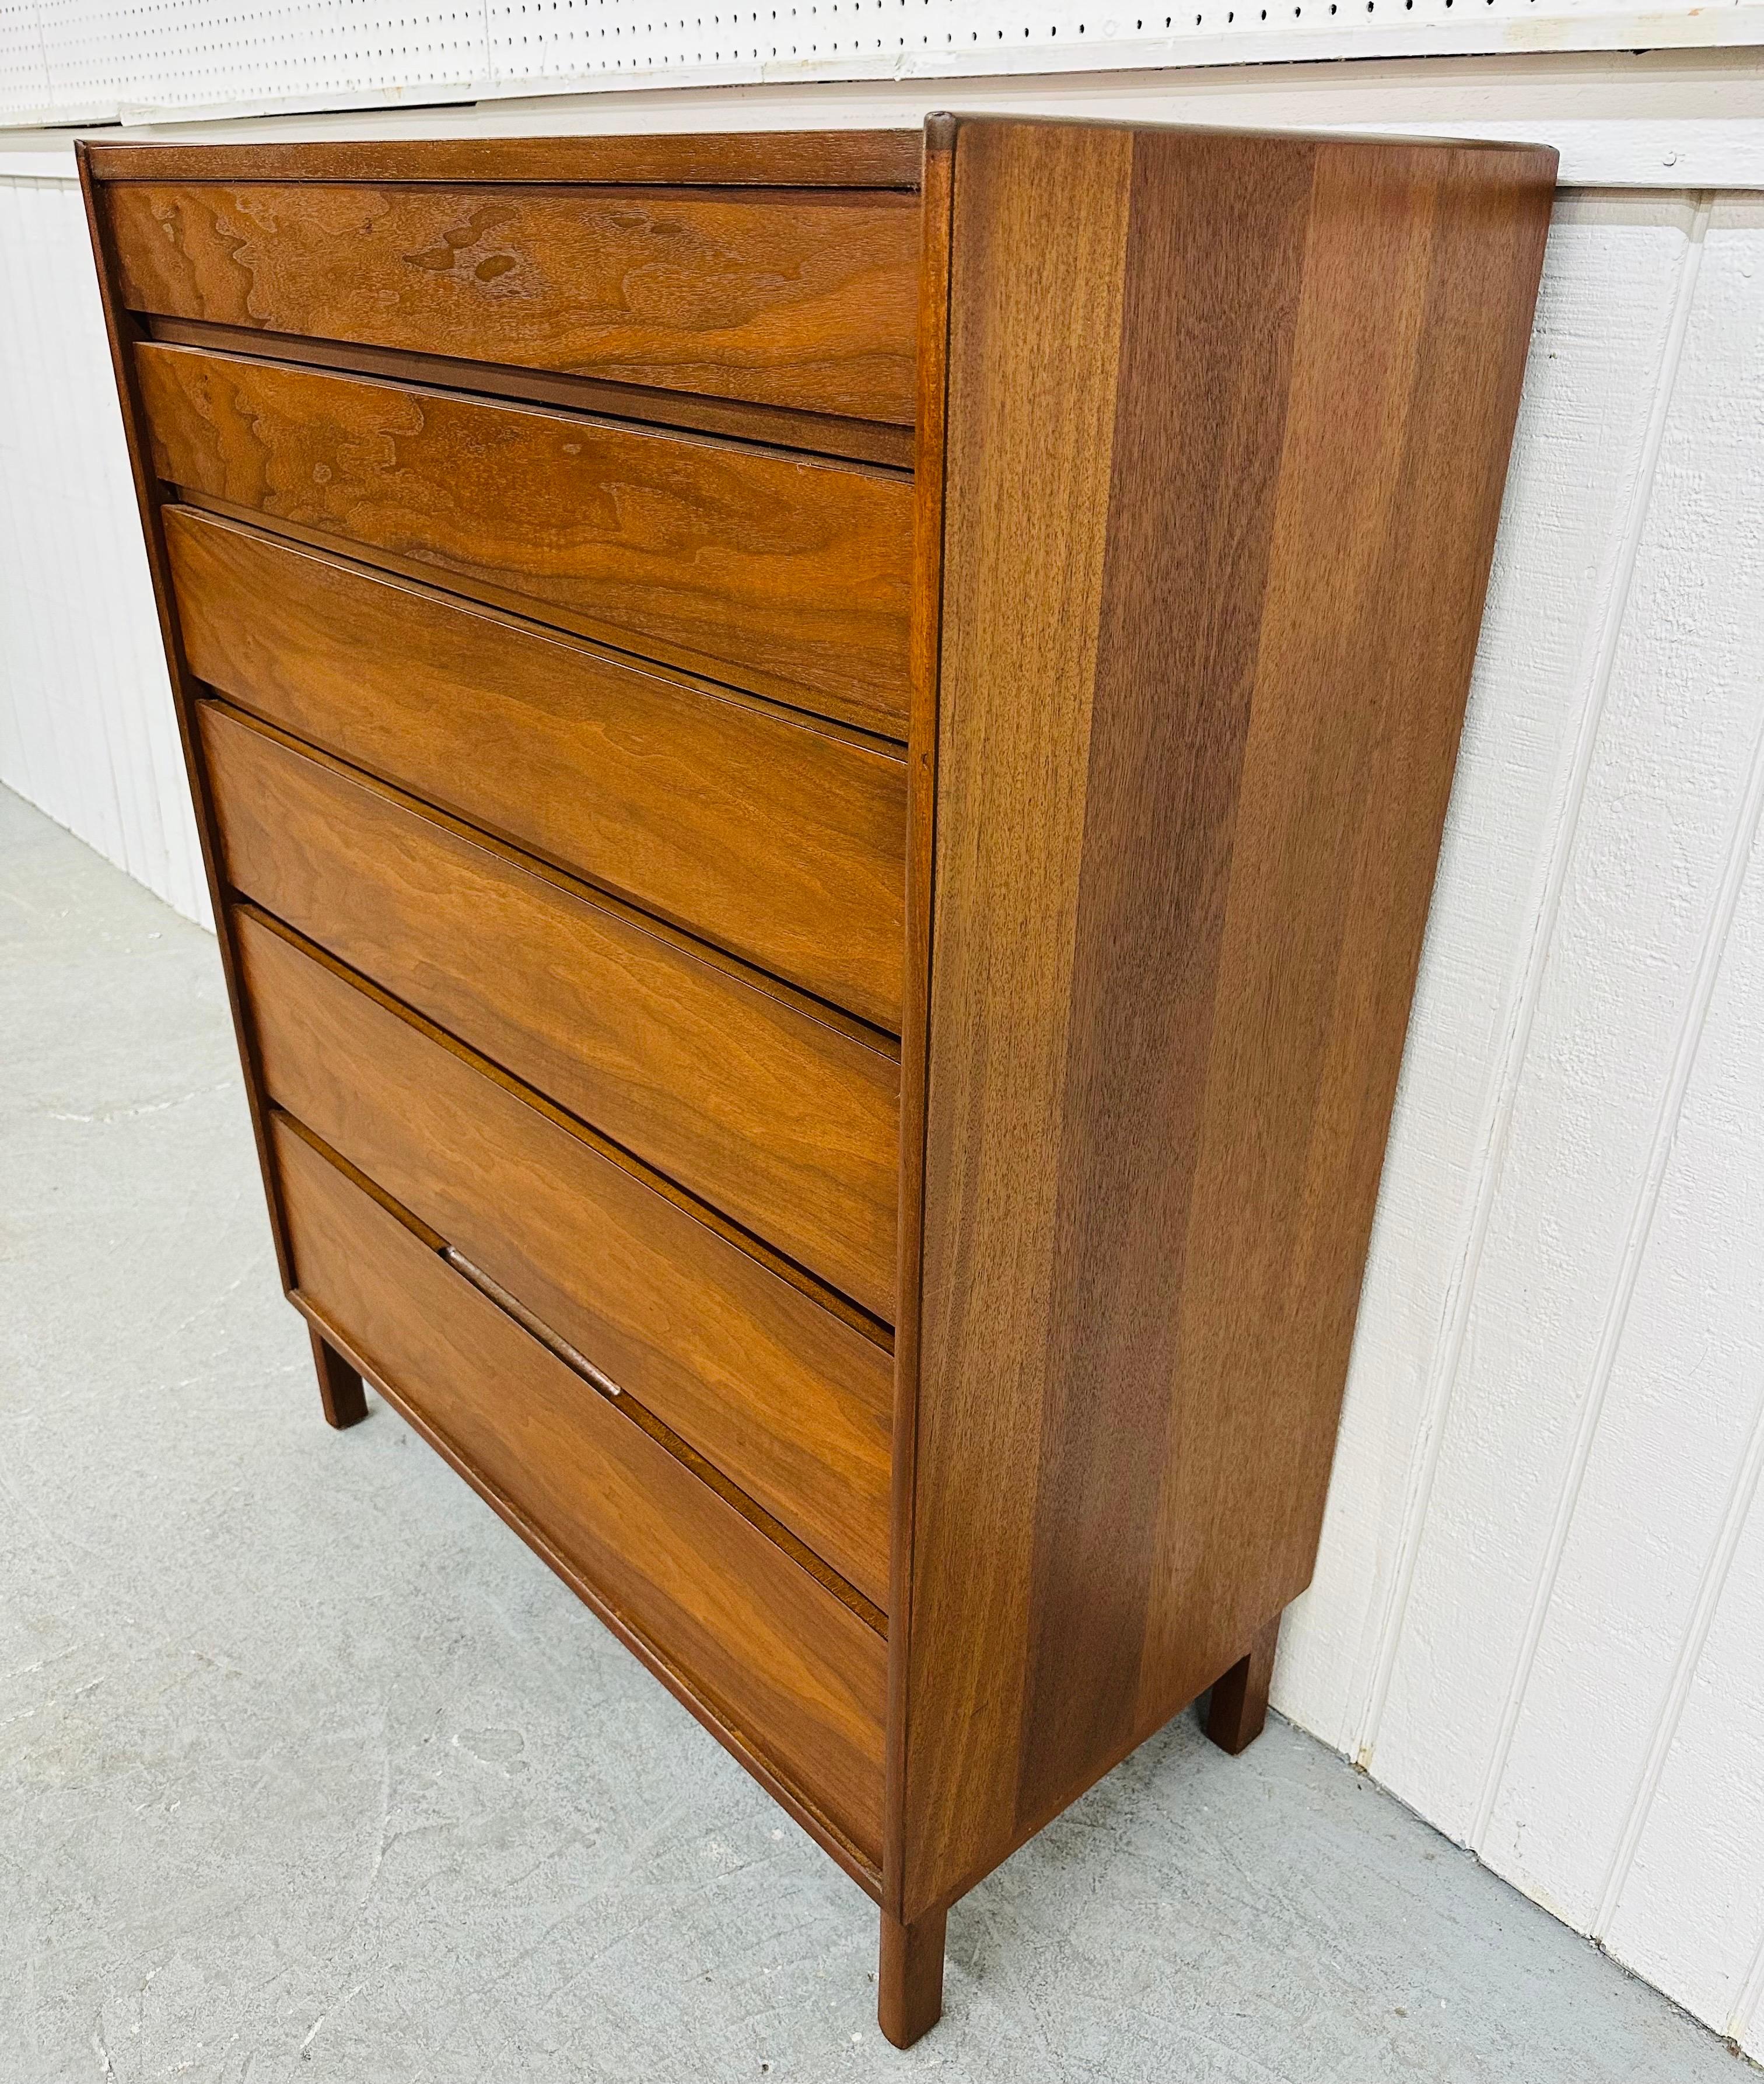 This listing is for a Mid-Century Modern Dunbar for Edward Wormley Walnut High Chest. Featuring a straight line design, six graduated drawers for storage, modern legs, and a beautiful walnut finish. This is an exceptional combination of quality and